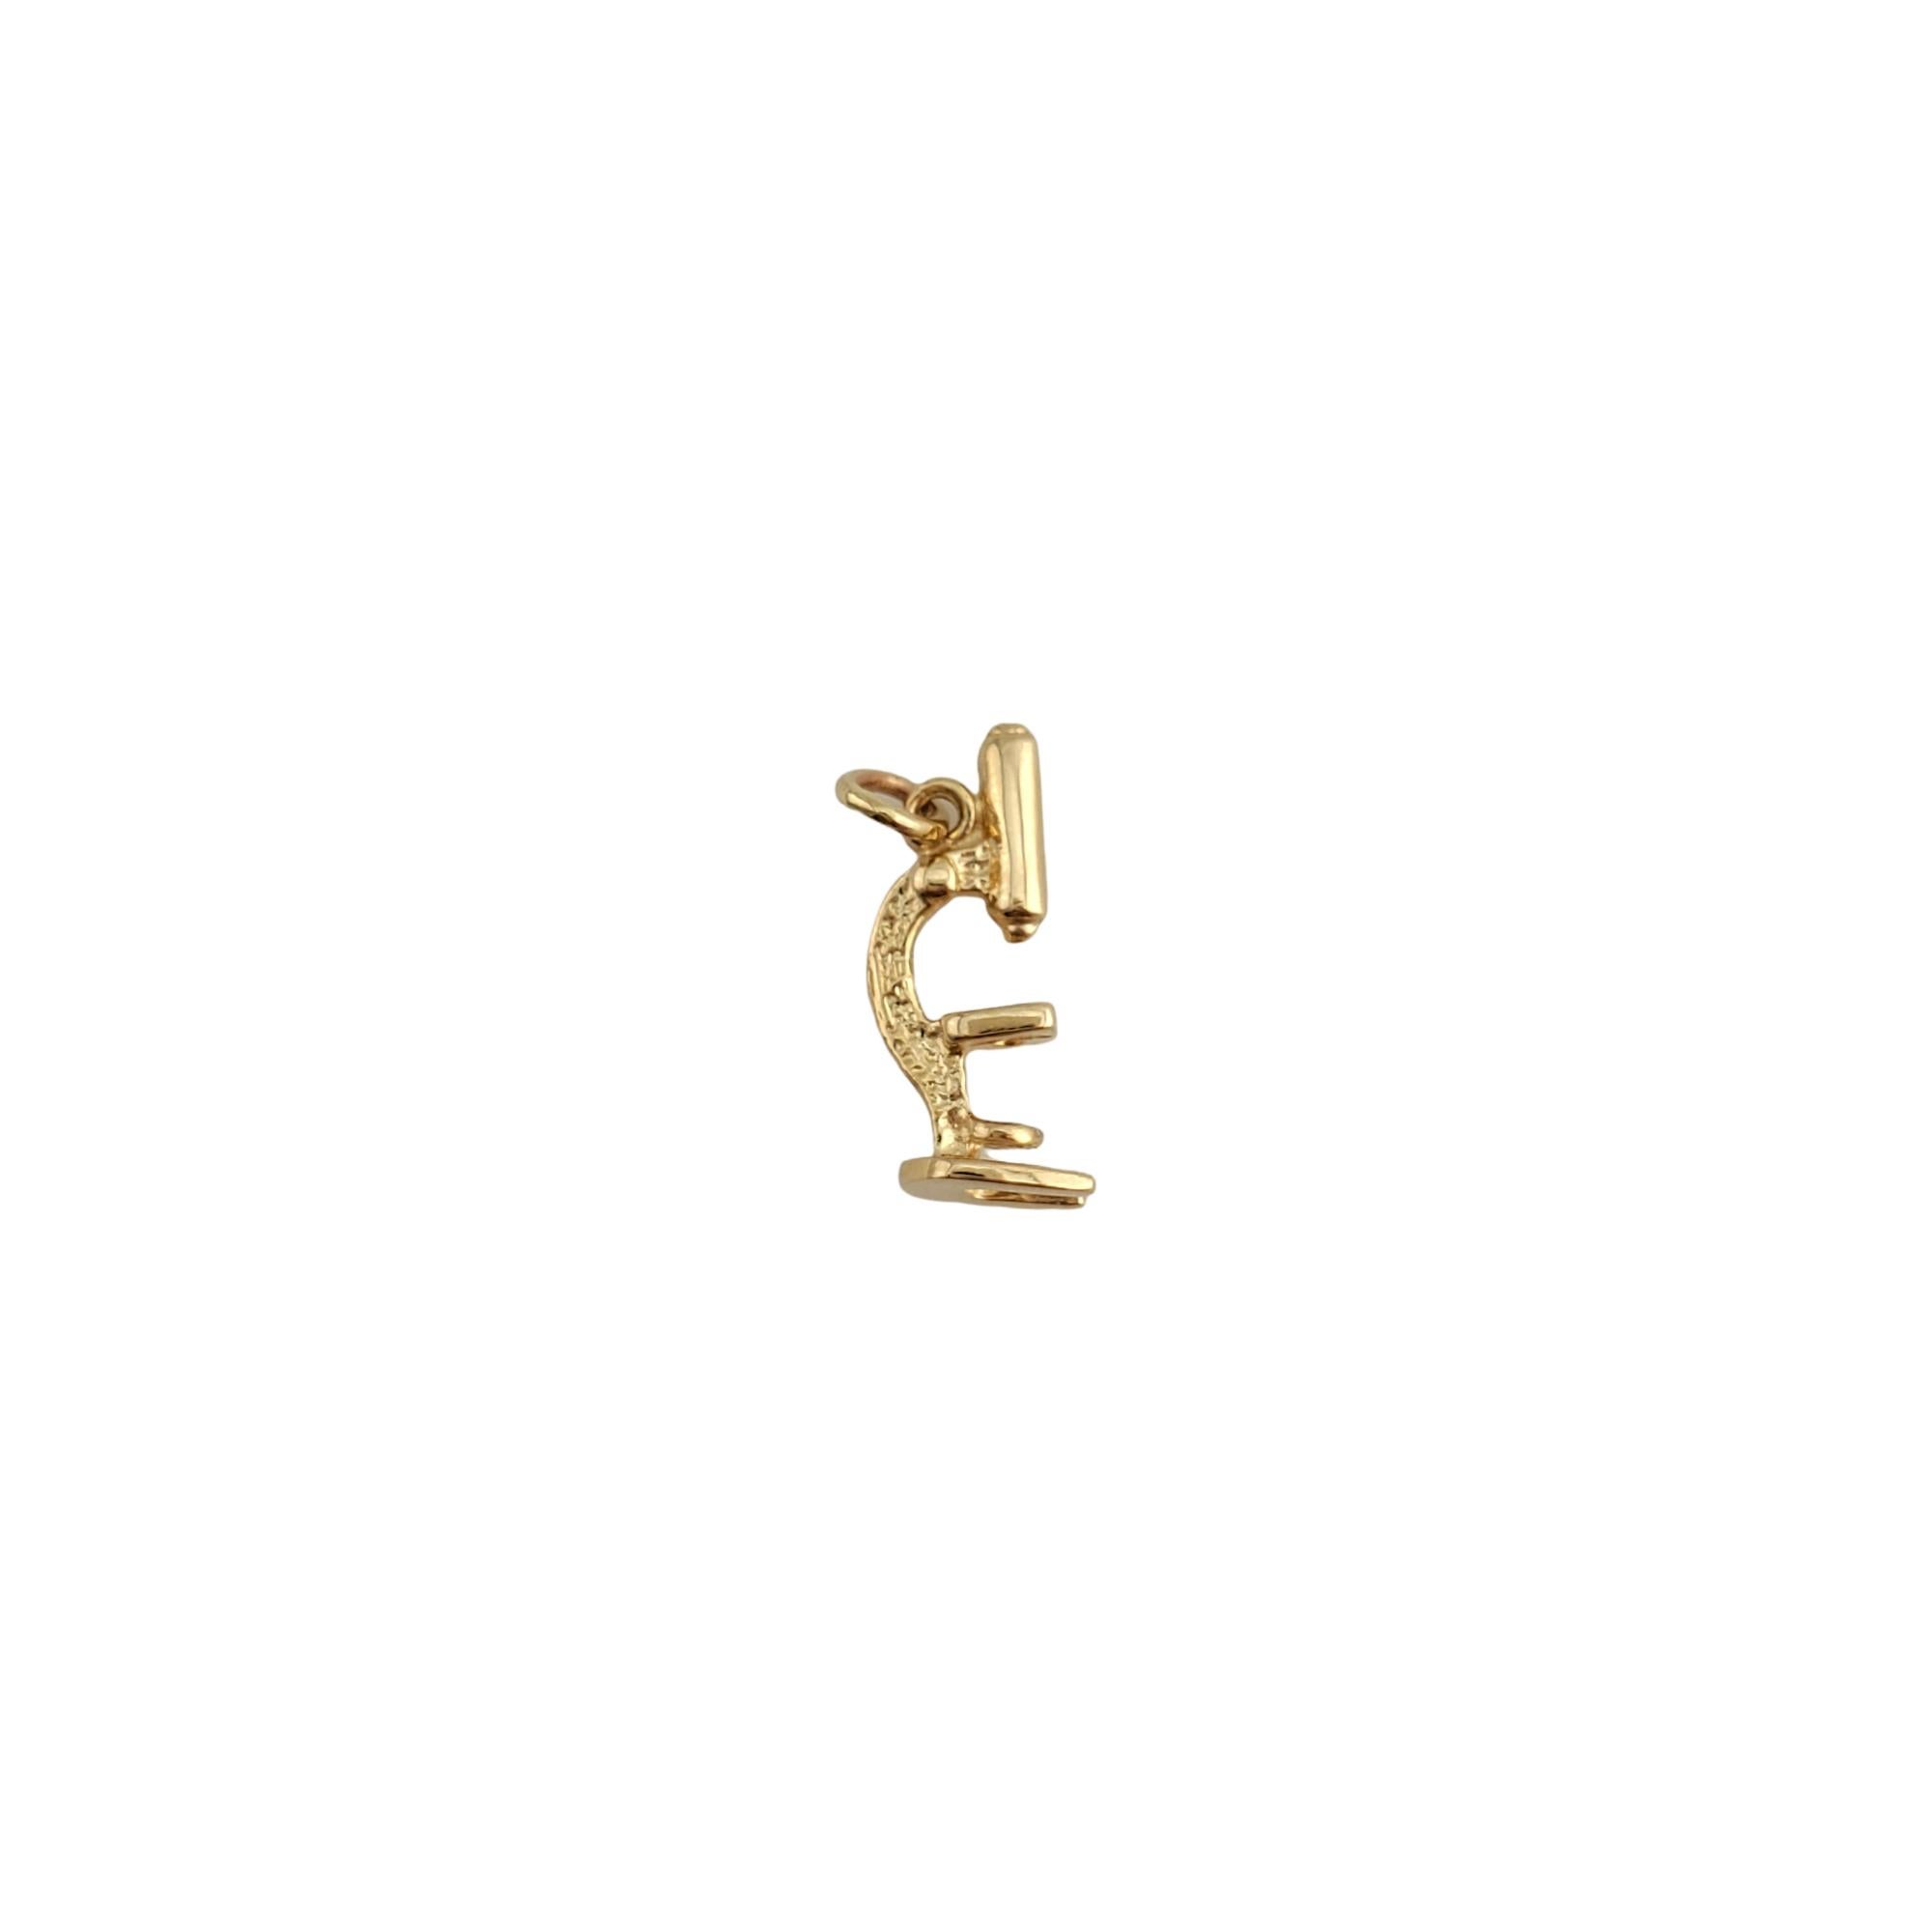 Vintage 14K Yellow Gold Microscope Charm 

You'll love this vintage 14k yellow gold microscope charm!

Size: 7.37mm X 17.26mm

Weight:  1.8gr /  1.1dwt

Very good condition, professionally polished.

Will come packaged in a gift box and will be